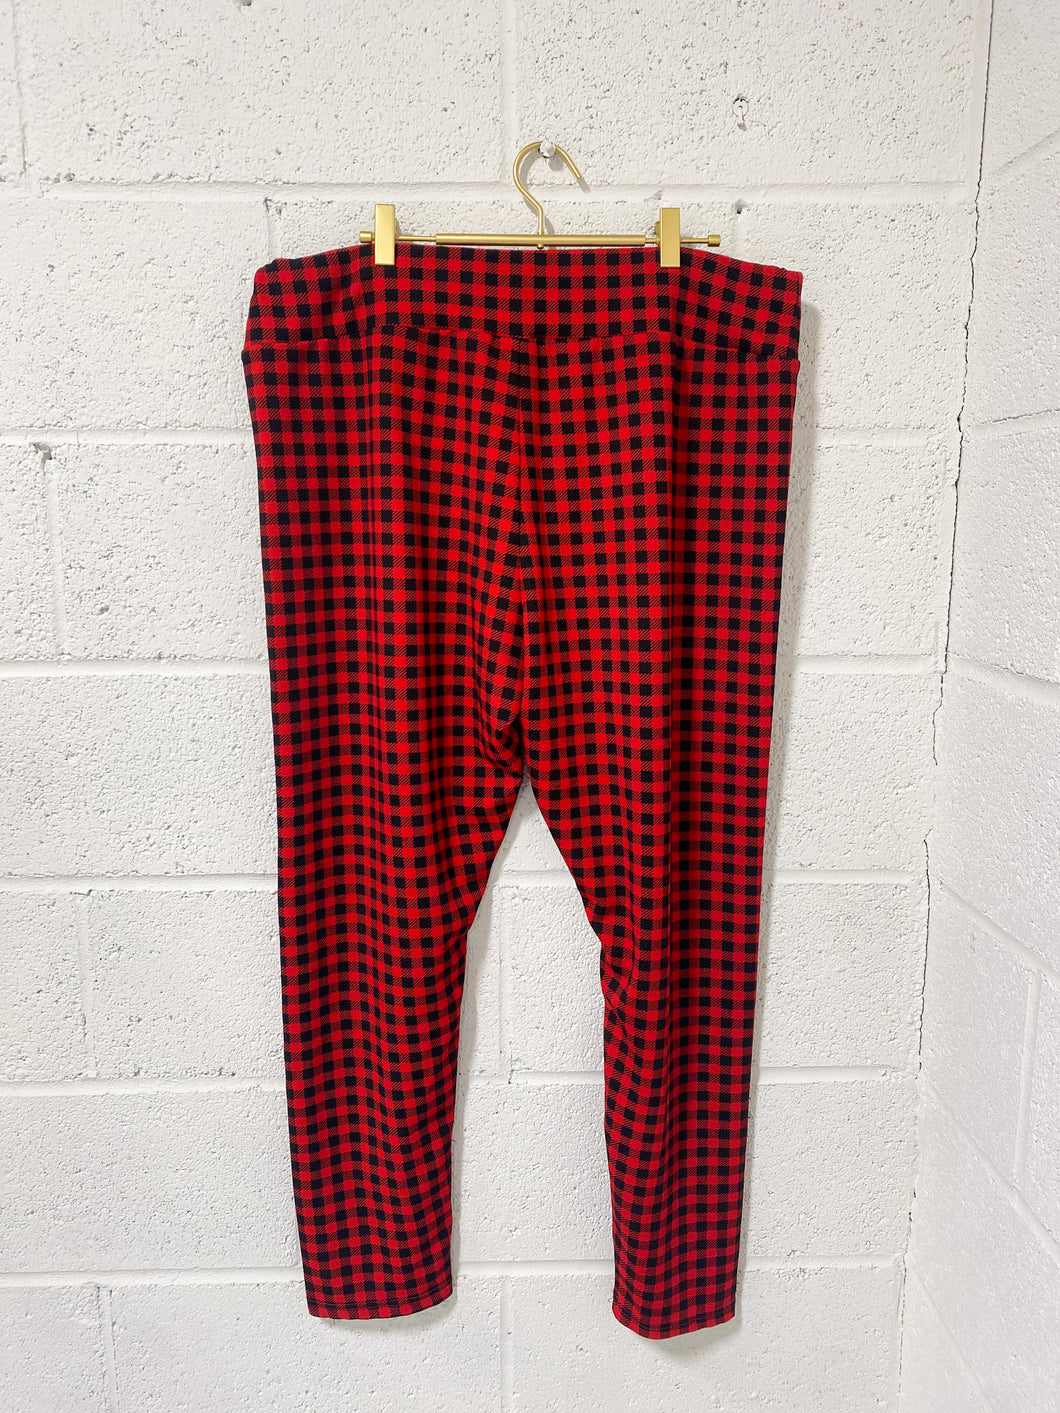 Red and Black Checkered Stretchy Pants (4X)